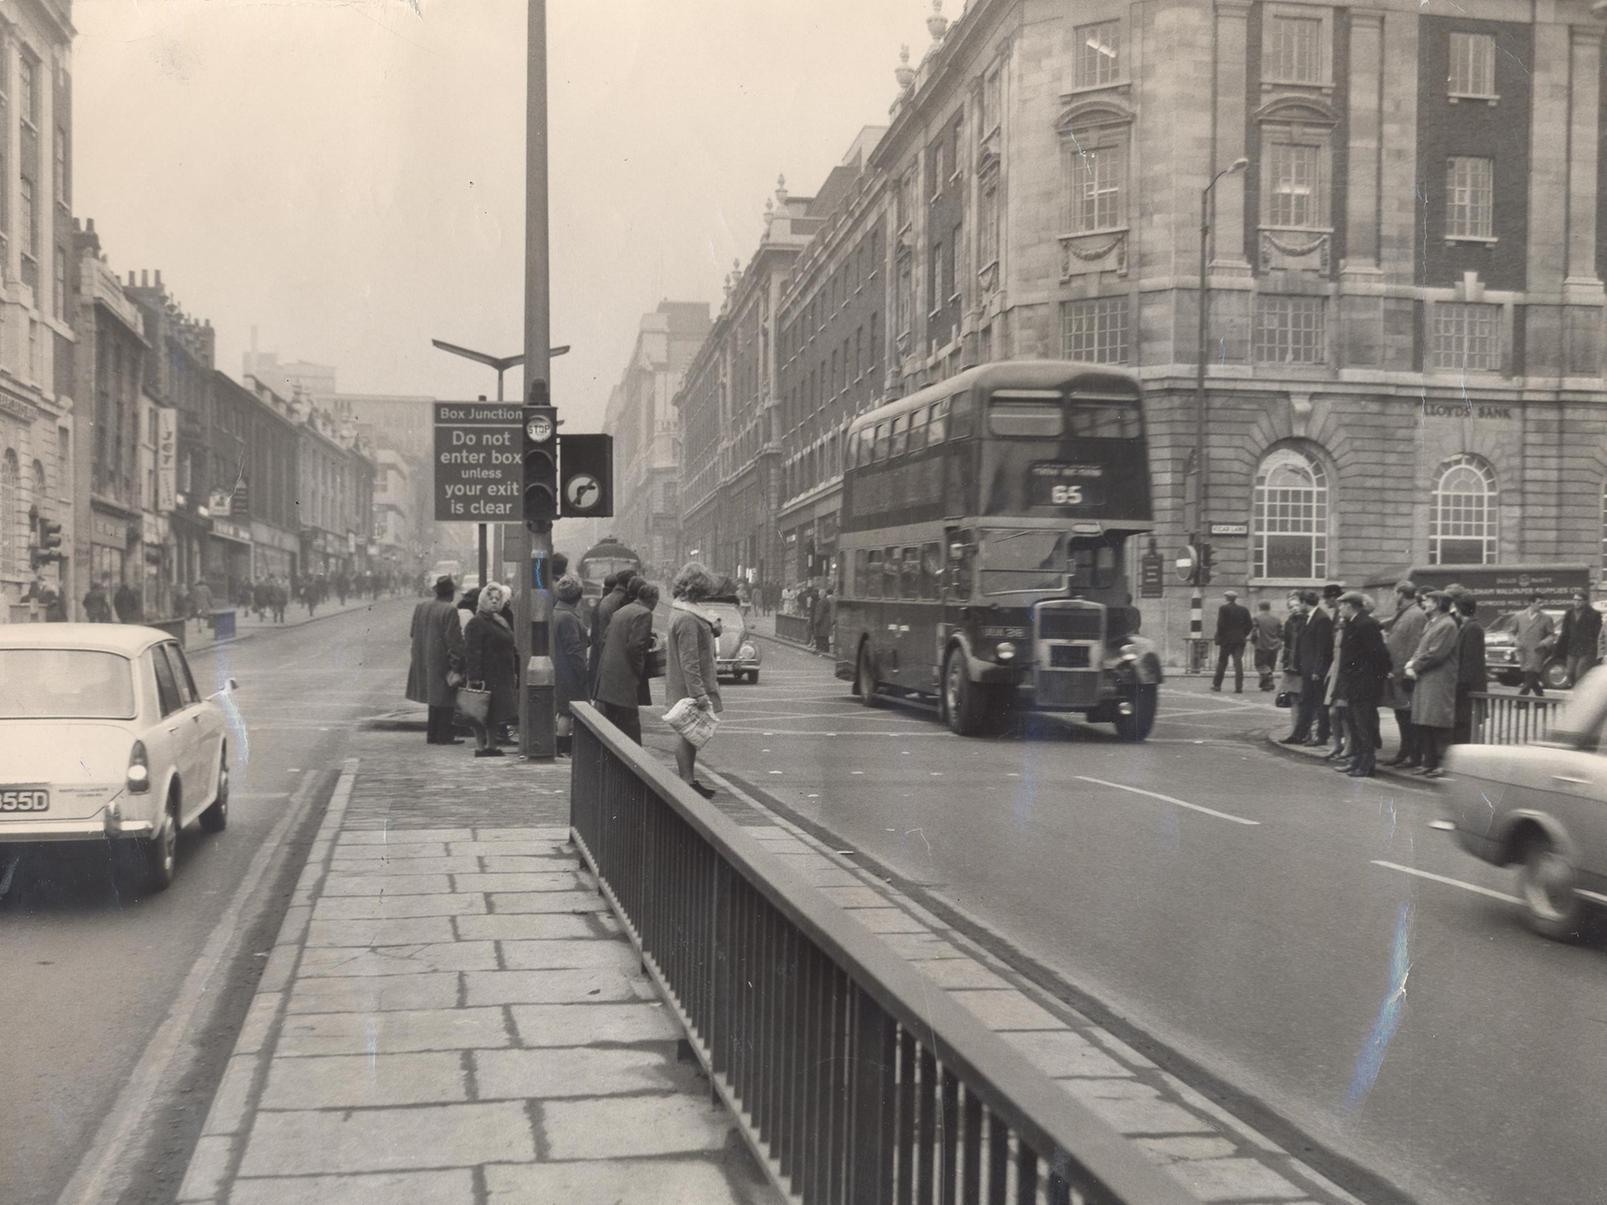 Pedestrians wait to cross the junction of Eastgate, The Headrow and Vicar Lane.